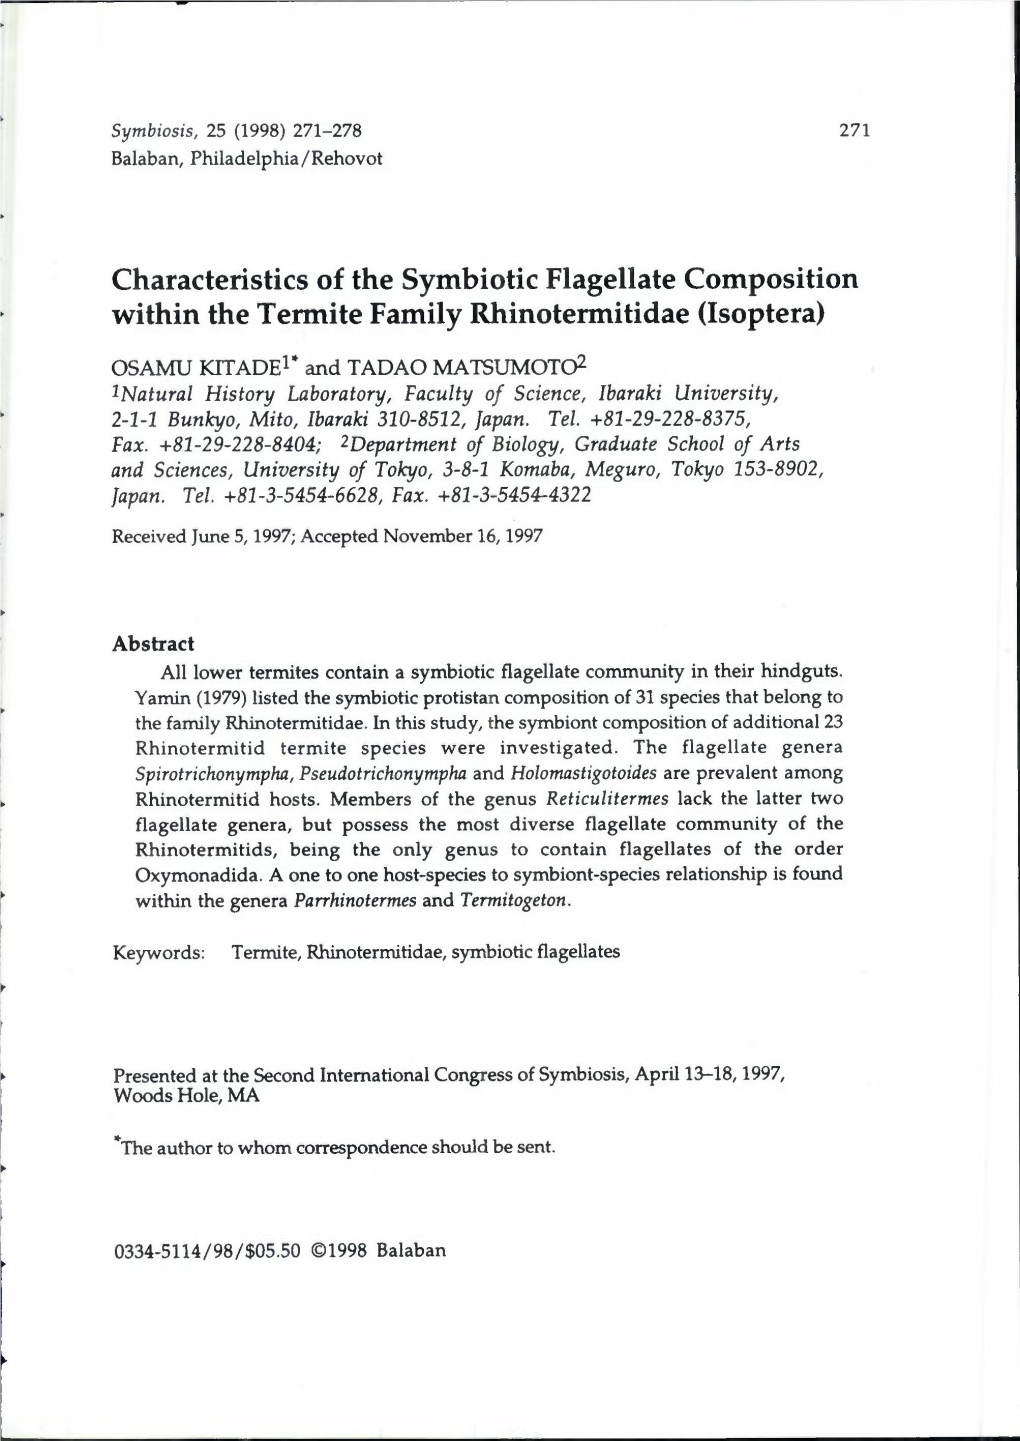 Characteristics of the Symbiotic Flagellate Composition Within the Termite Family Rhinotermitidae (Isoptera)